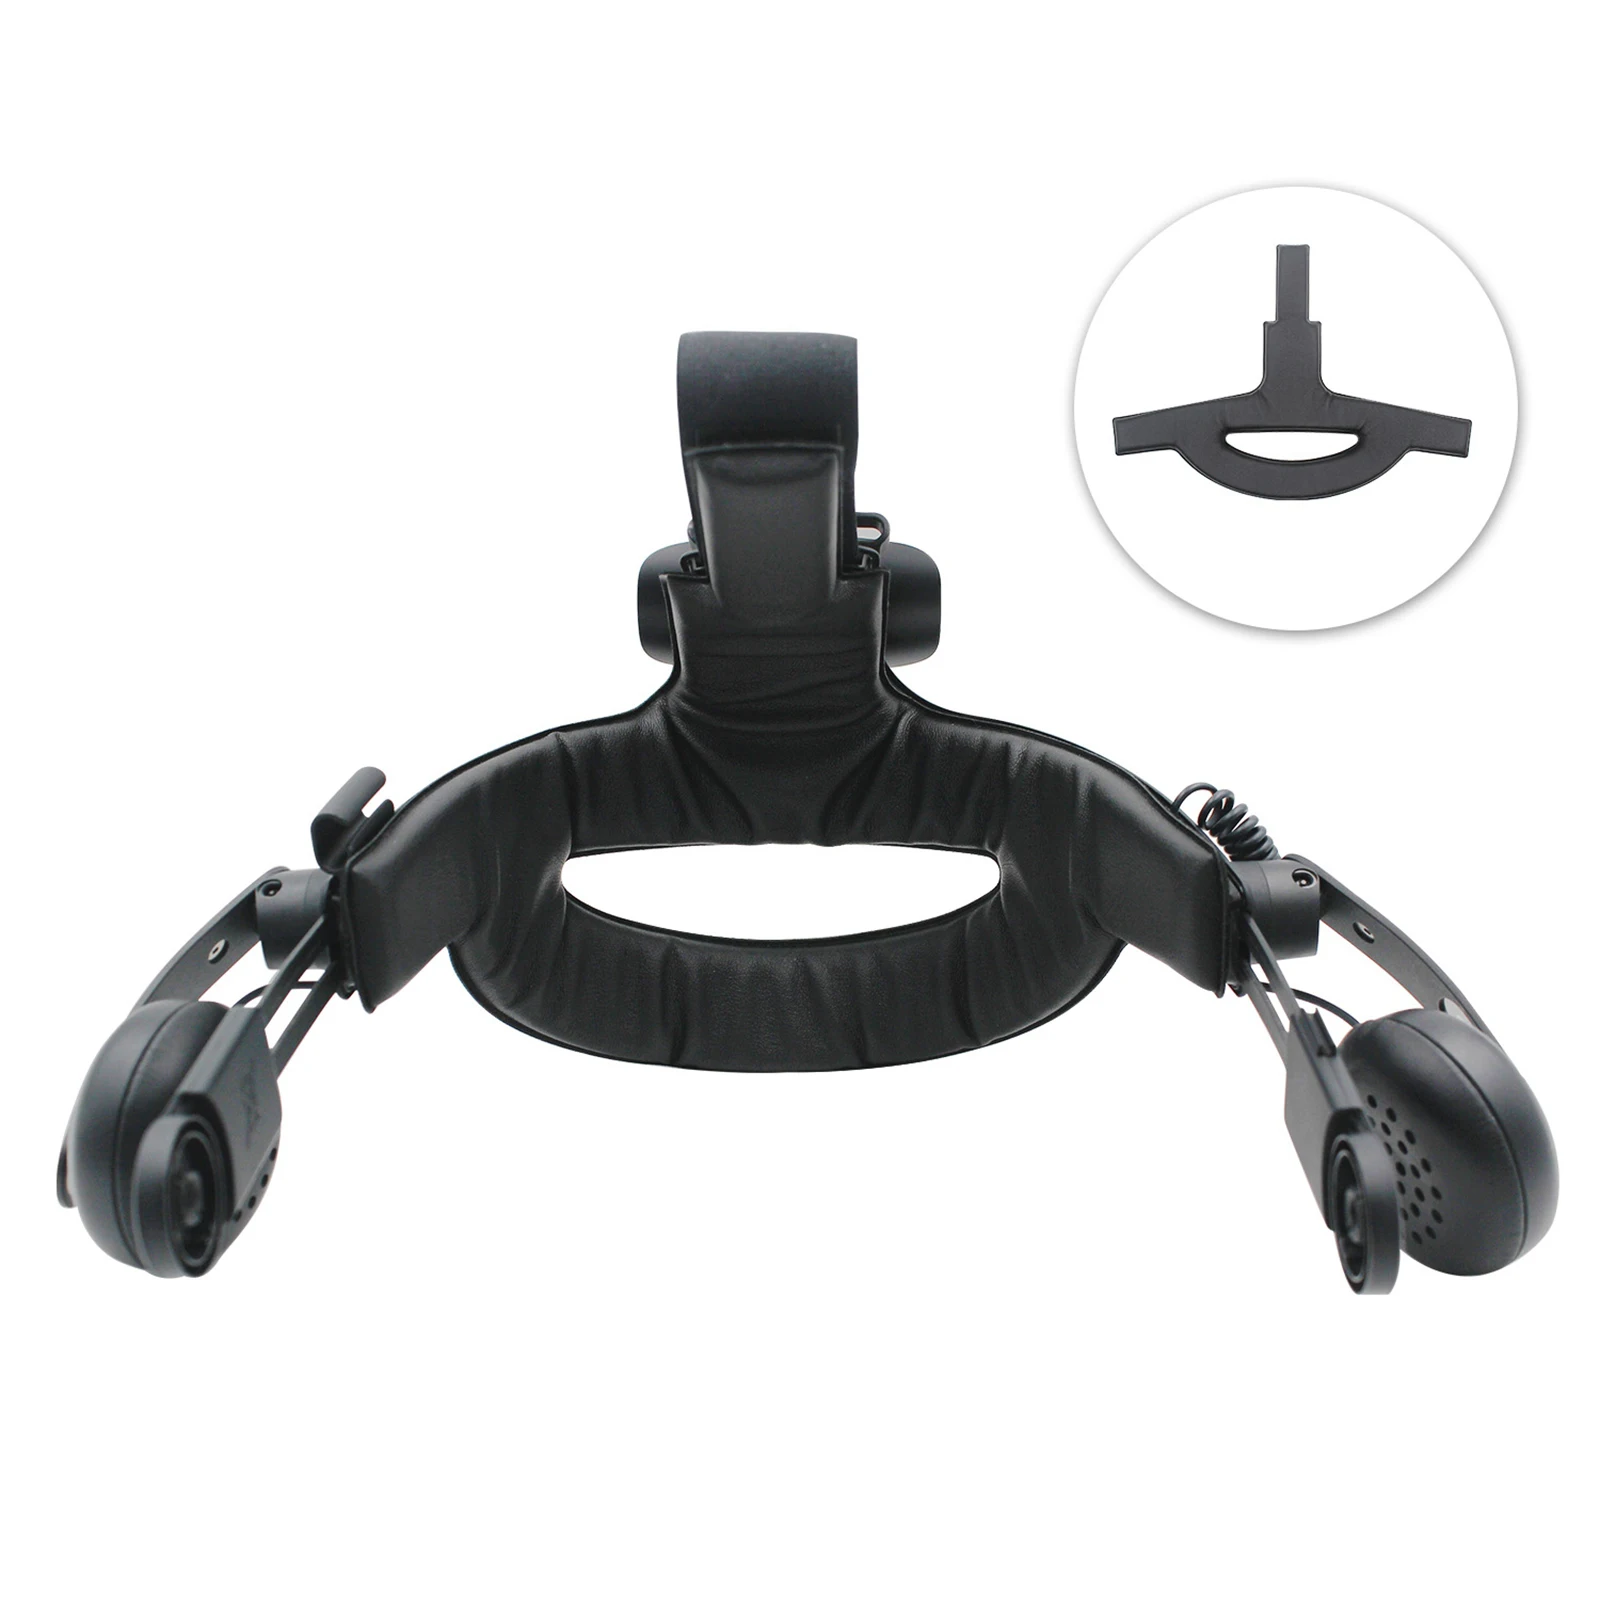 Reduce Pressure Head Strap Pad Soft PU Leather VR Headset for